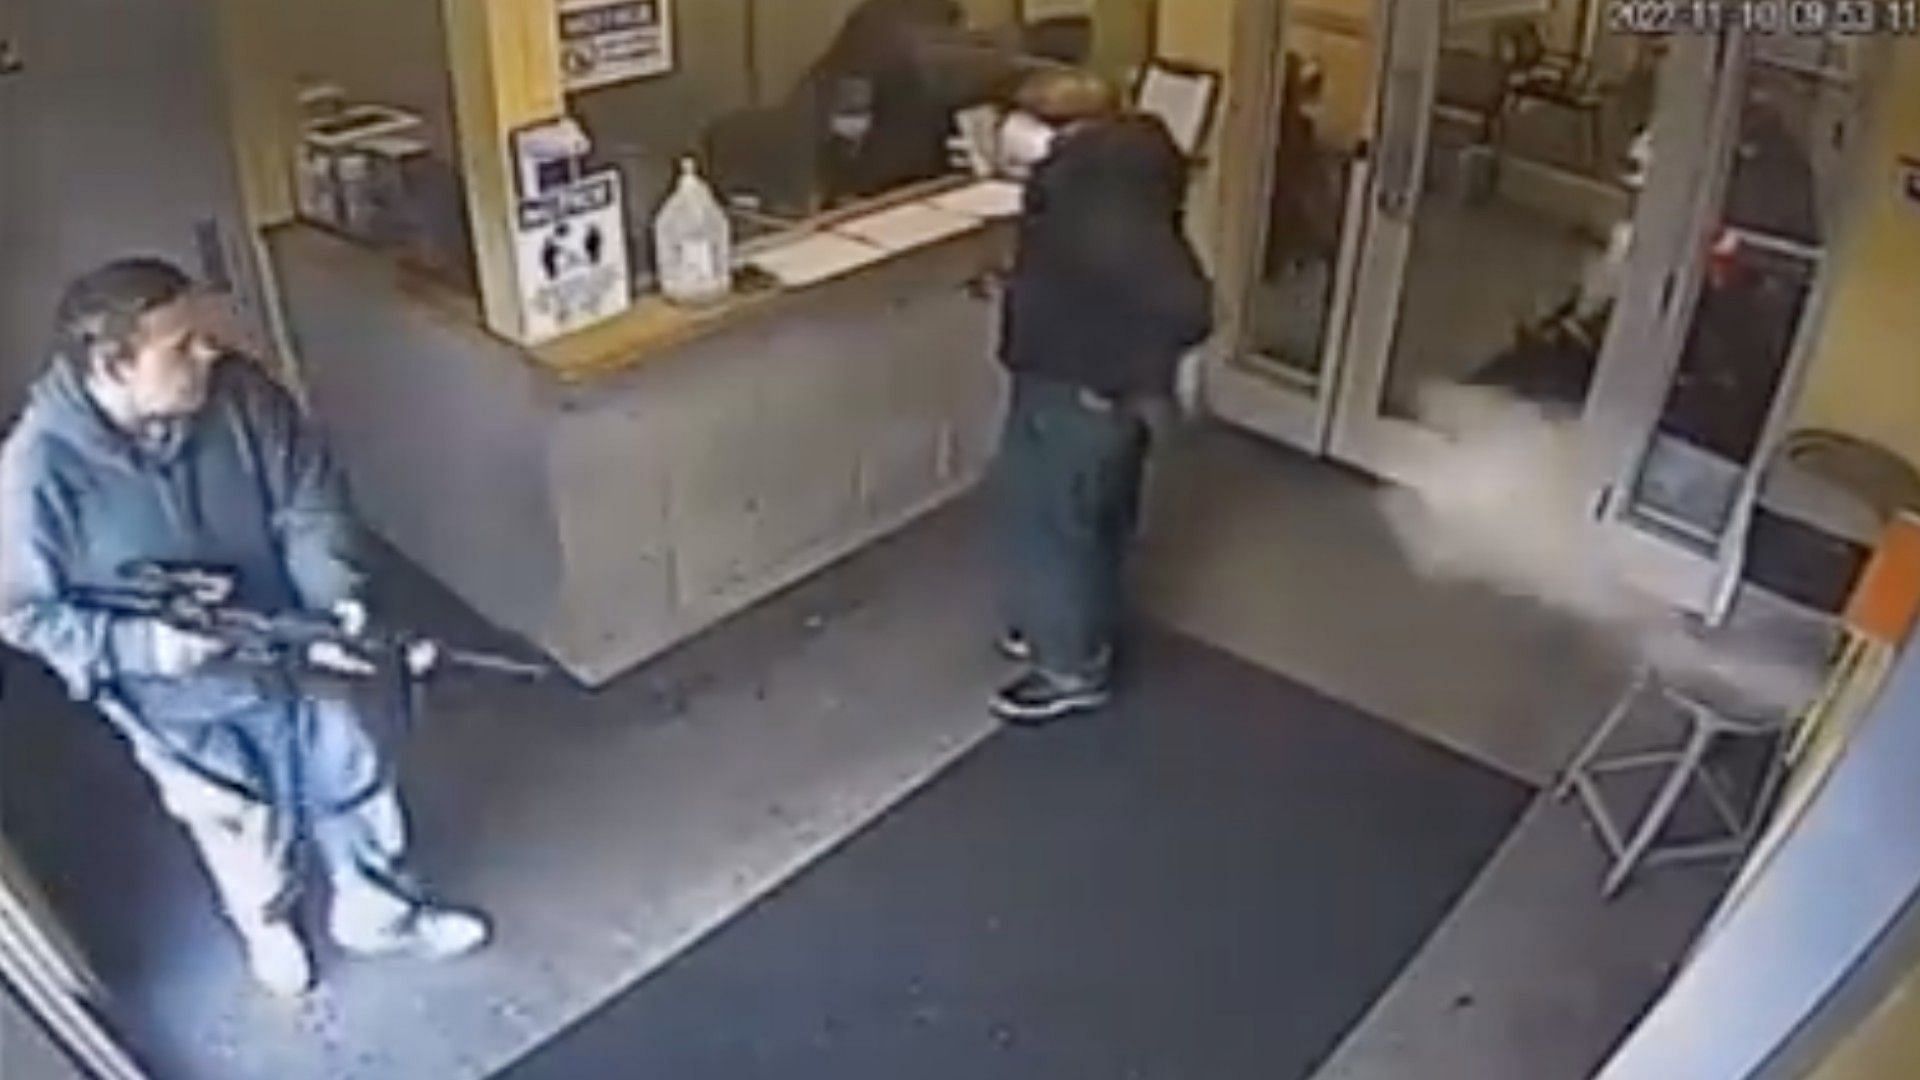 Unarmed guards stop a robbery at a methadone clinic in New York (Image via Buffalo Police Department/Twitter)